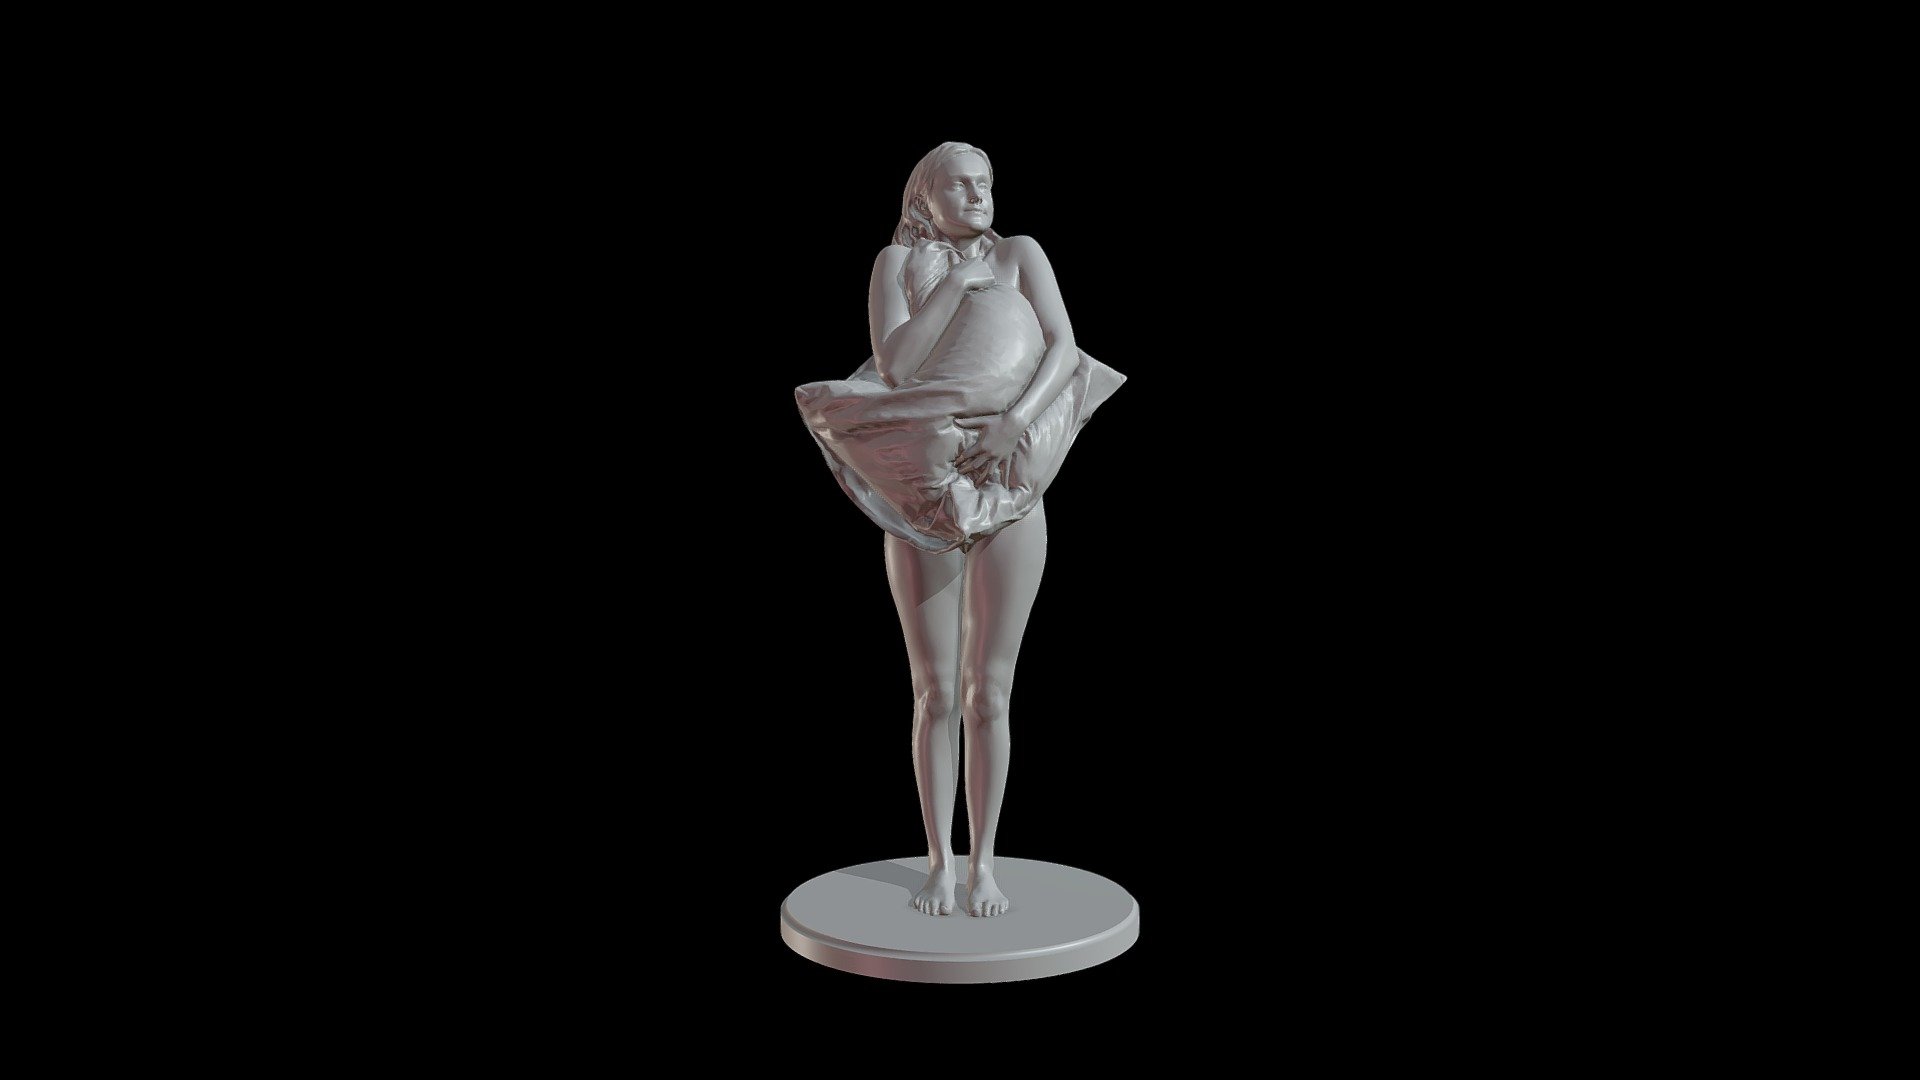 Eve 01-030- Figurine version

Another pose for this expressive model

Other models and poses at another-gallery

This model has been scanned by  another-me.fr - Eve_01-030_figurine - 3D model by Another-me (@fredlucazeau) 3d model